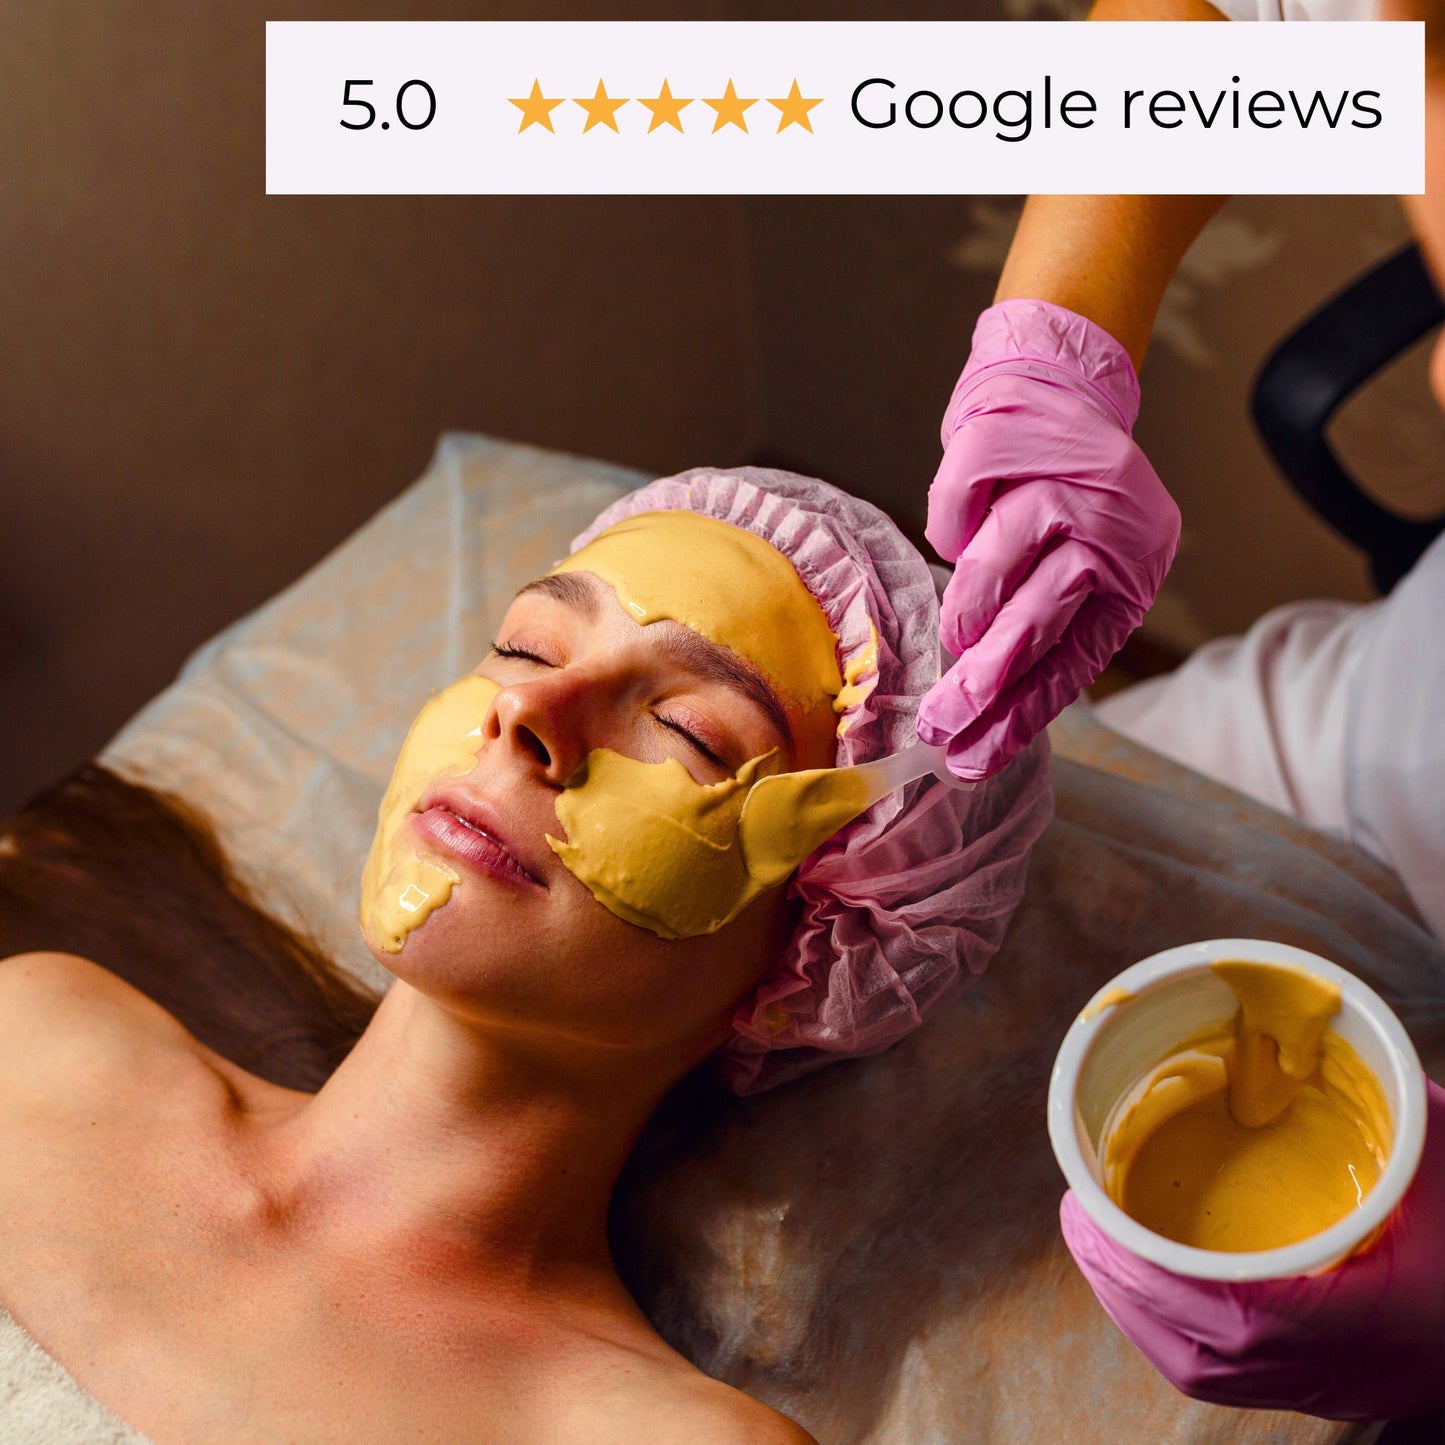 -50% for Women's Gold facial/ Thermo Herb Face lift/ Face Clean up with upper lip and eye brow threading at a Salon with a History of 15 Years in the field